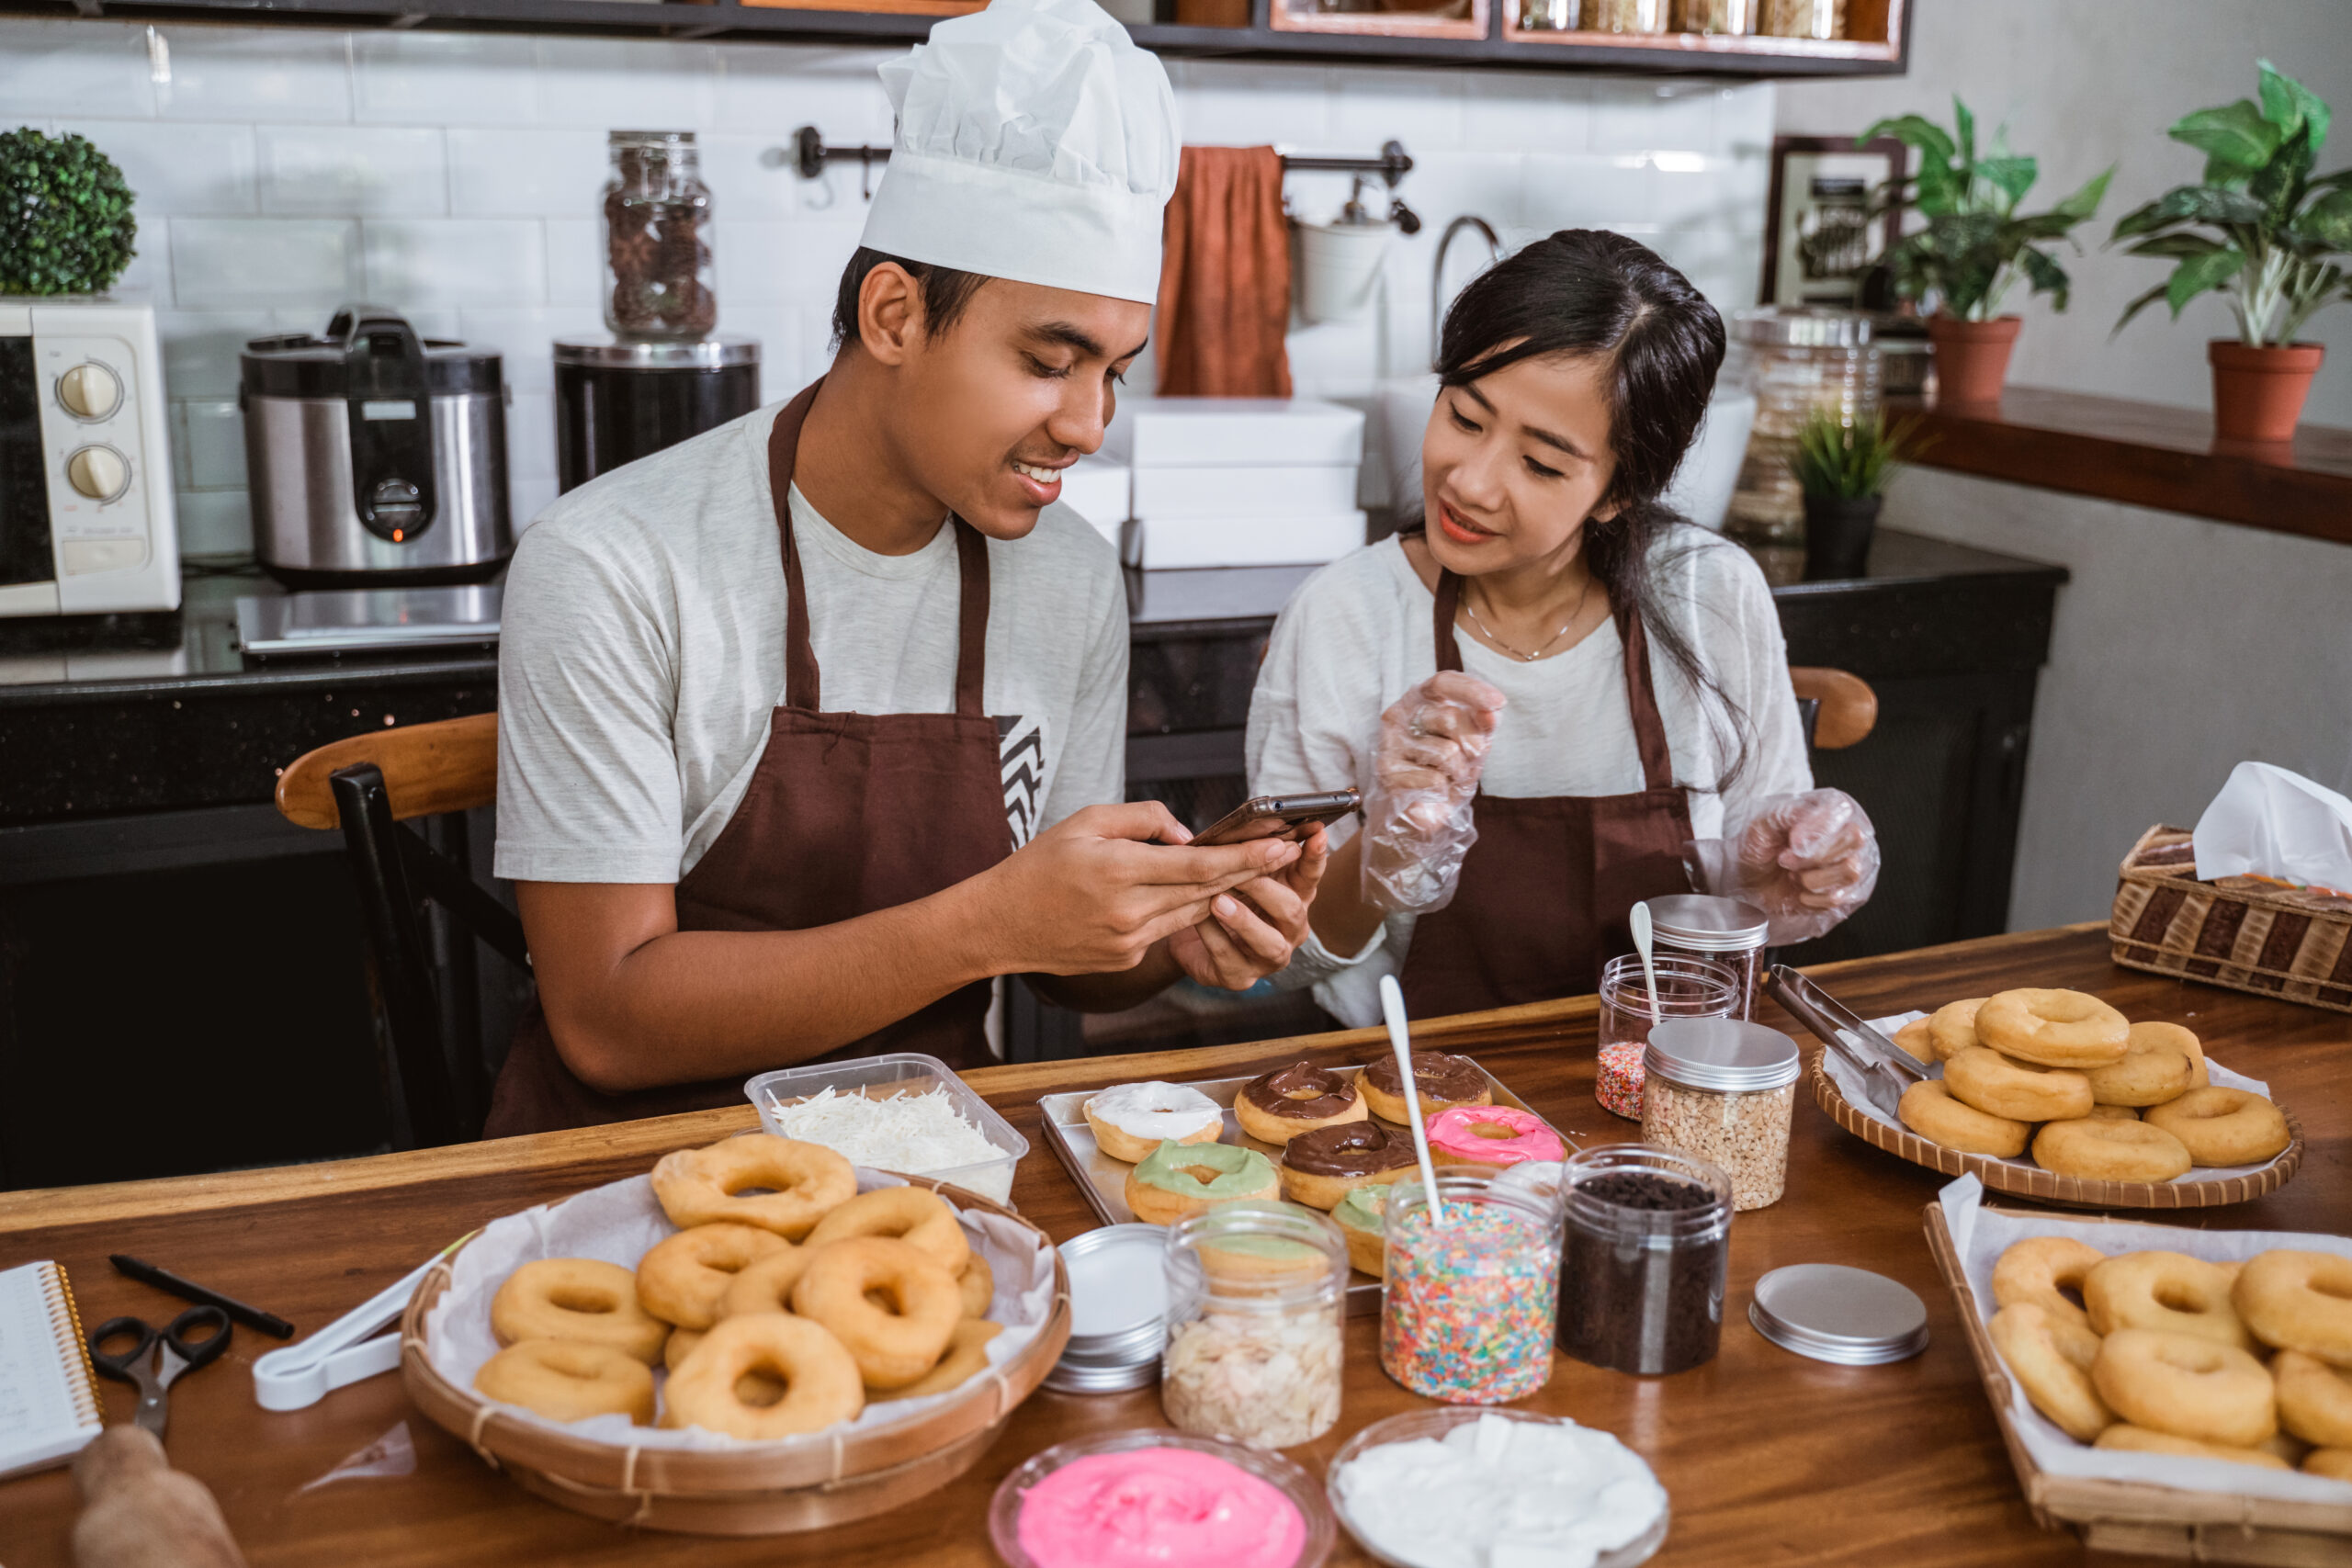 chefs wearing aprons use their cell phones to sell online after making donuts together